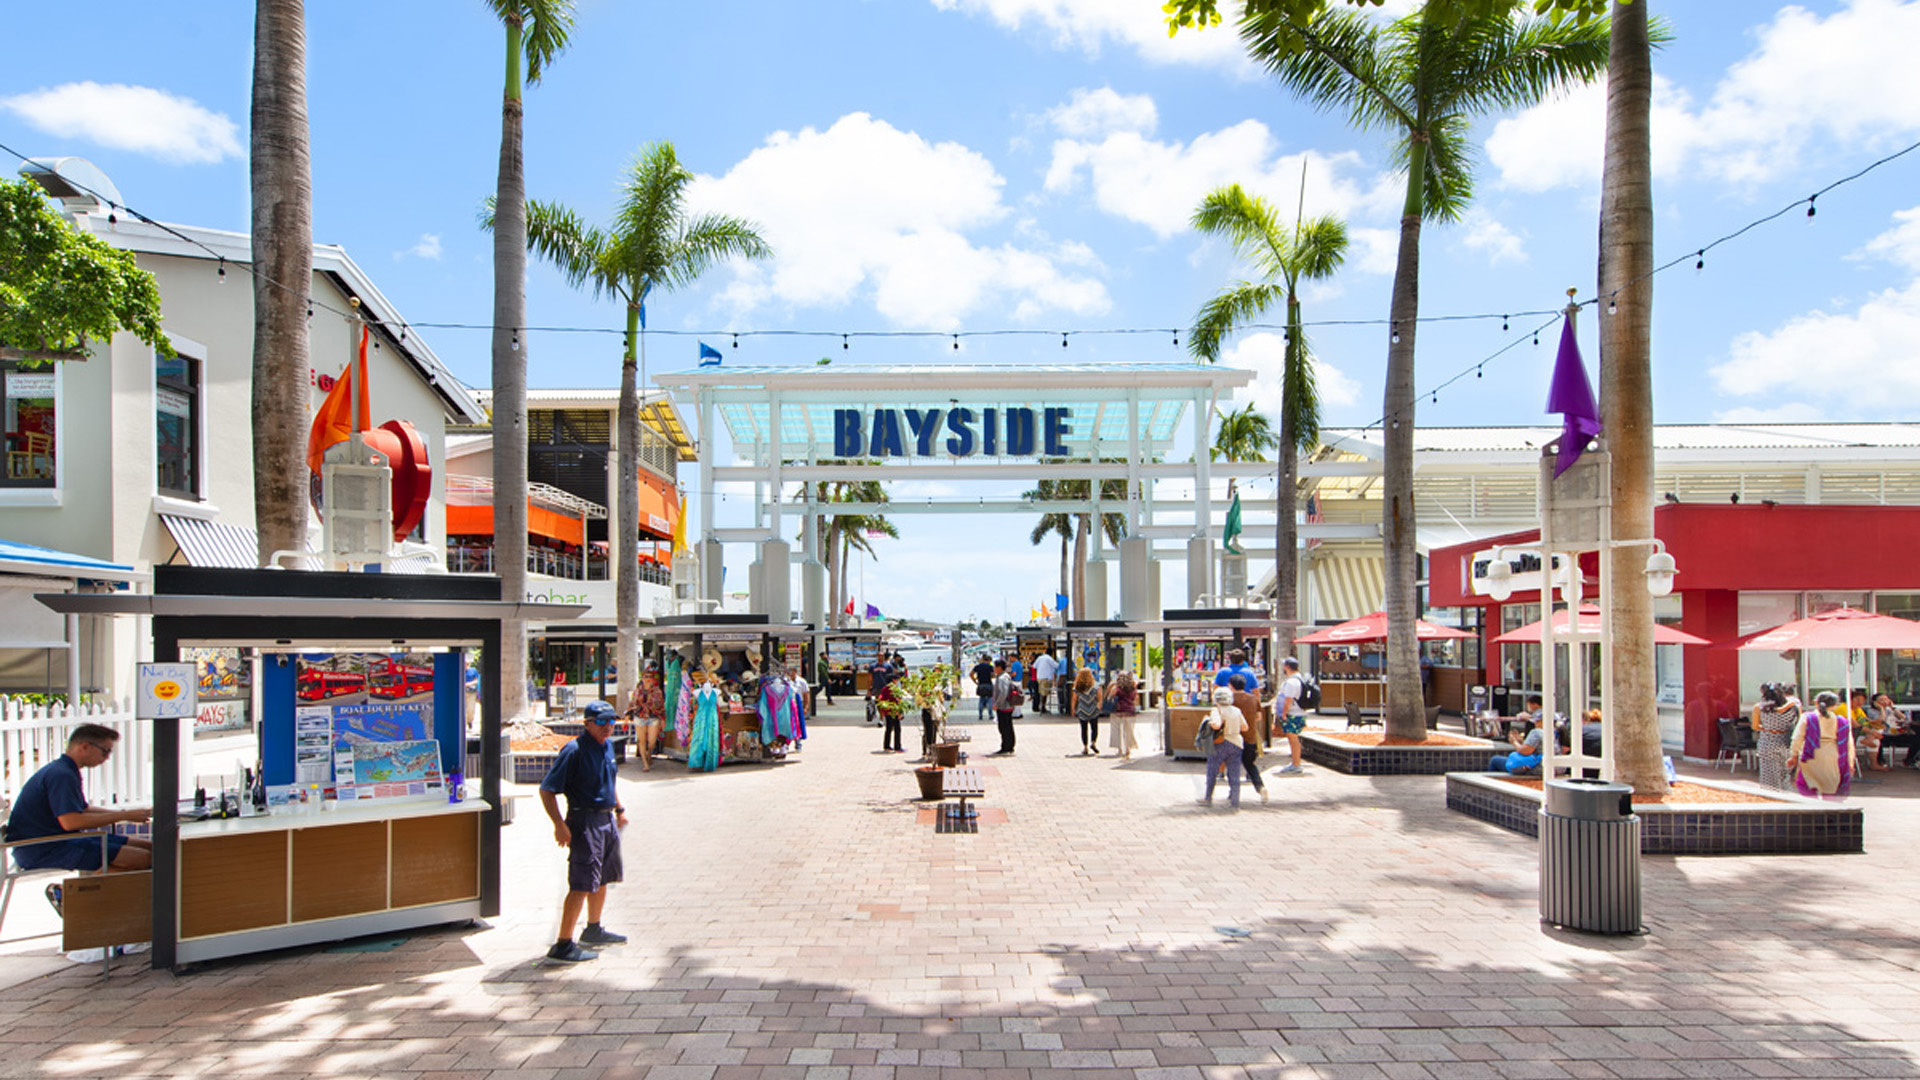 Sunny day at the Bayside Marketplace